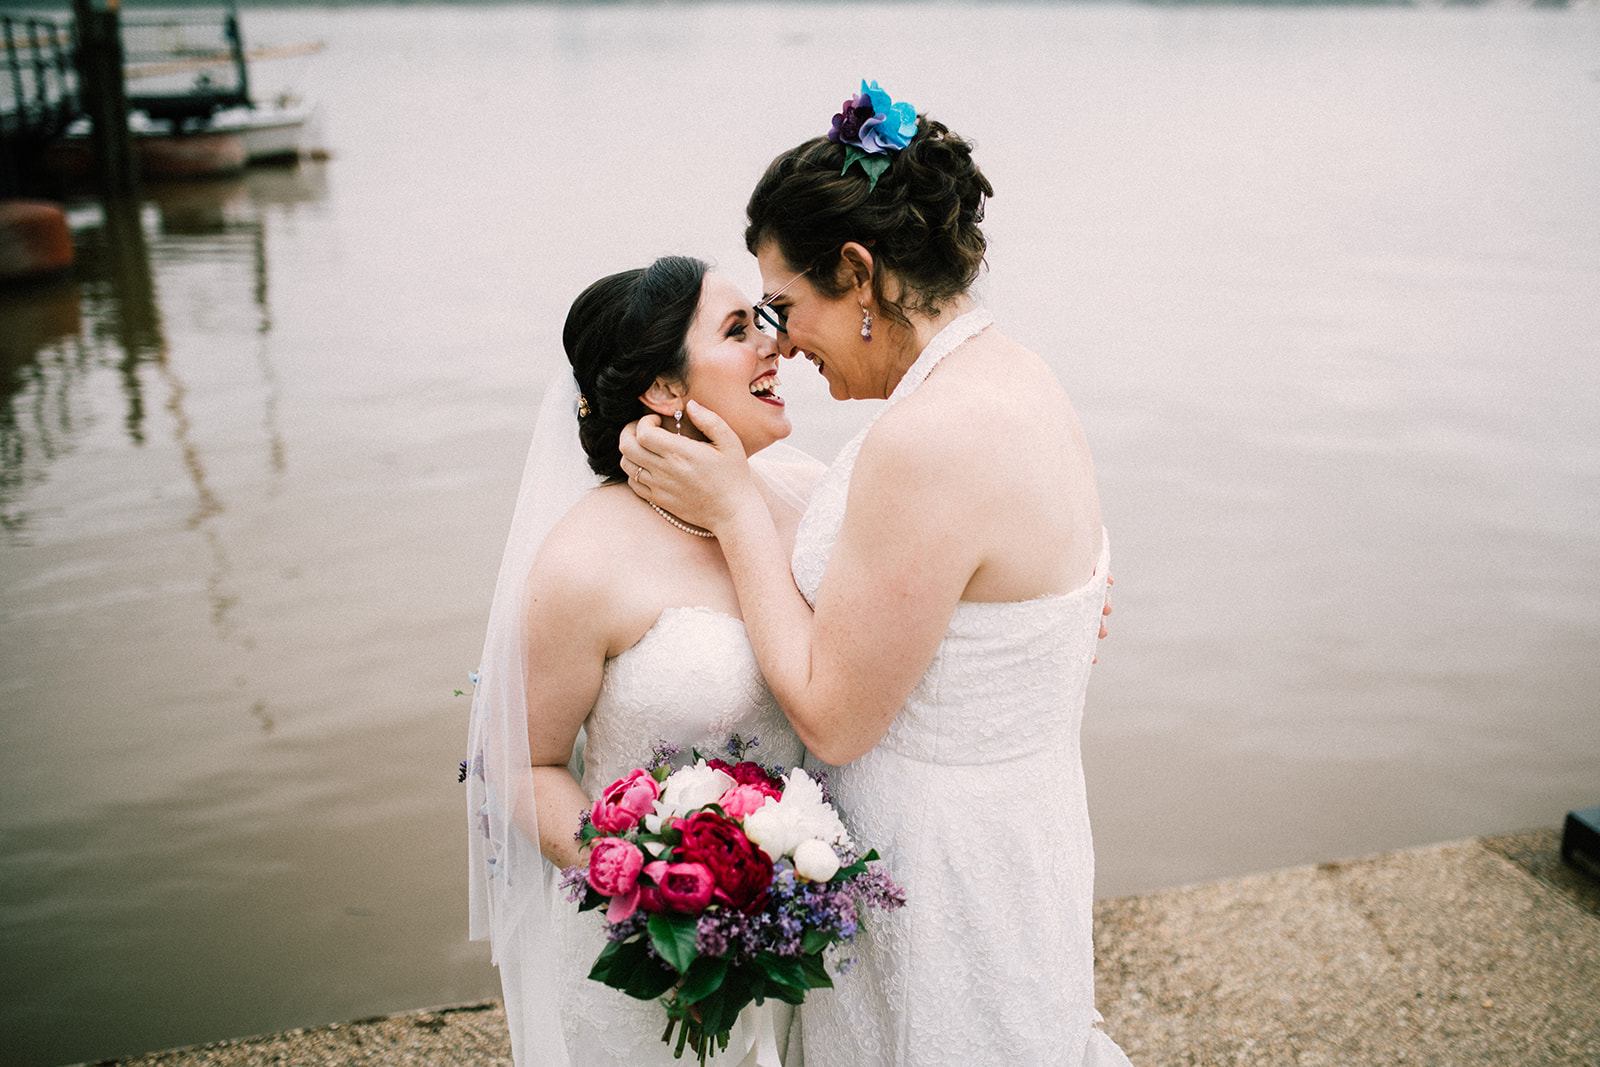 Two brides smile and hug at the shoreline.